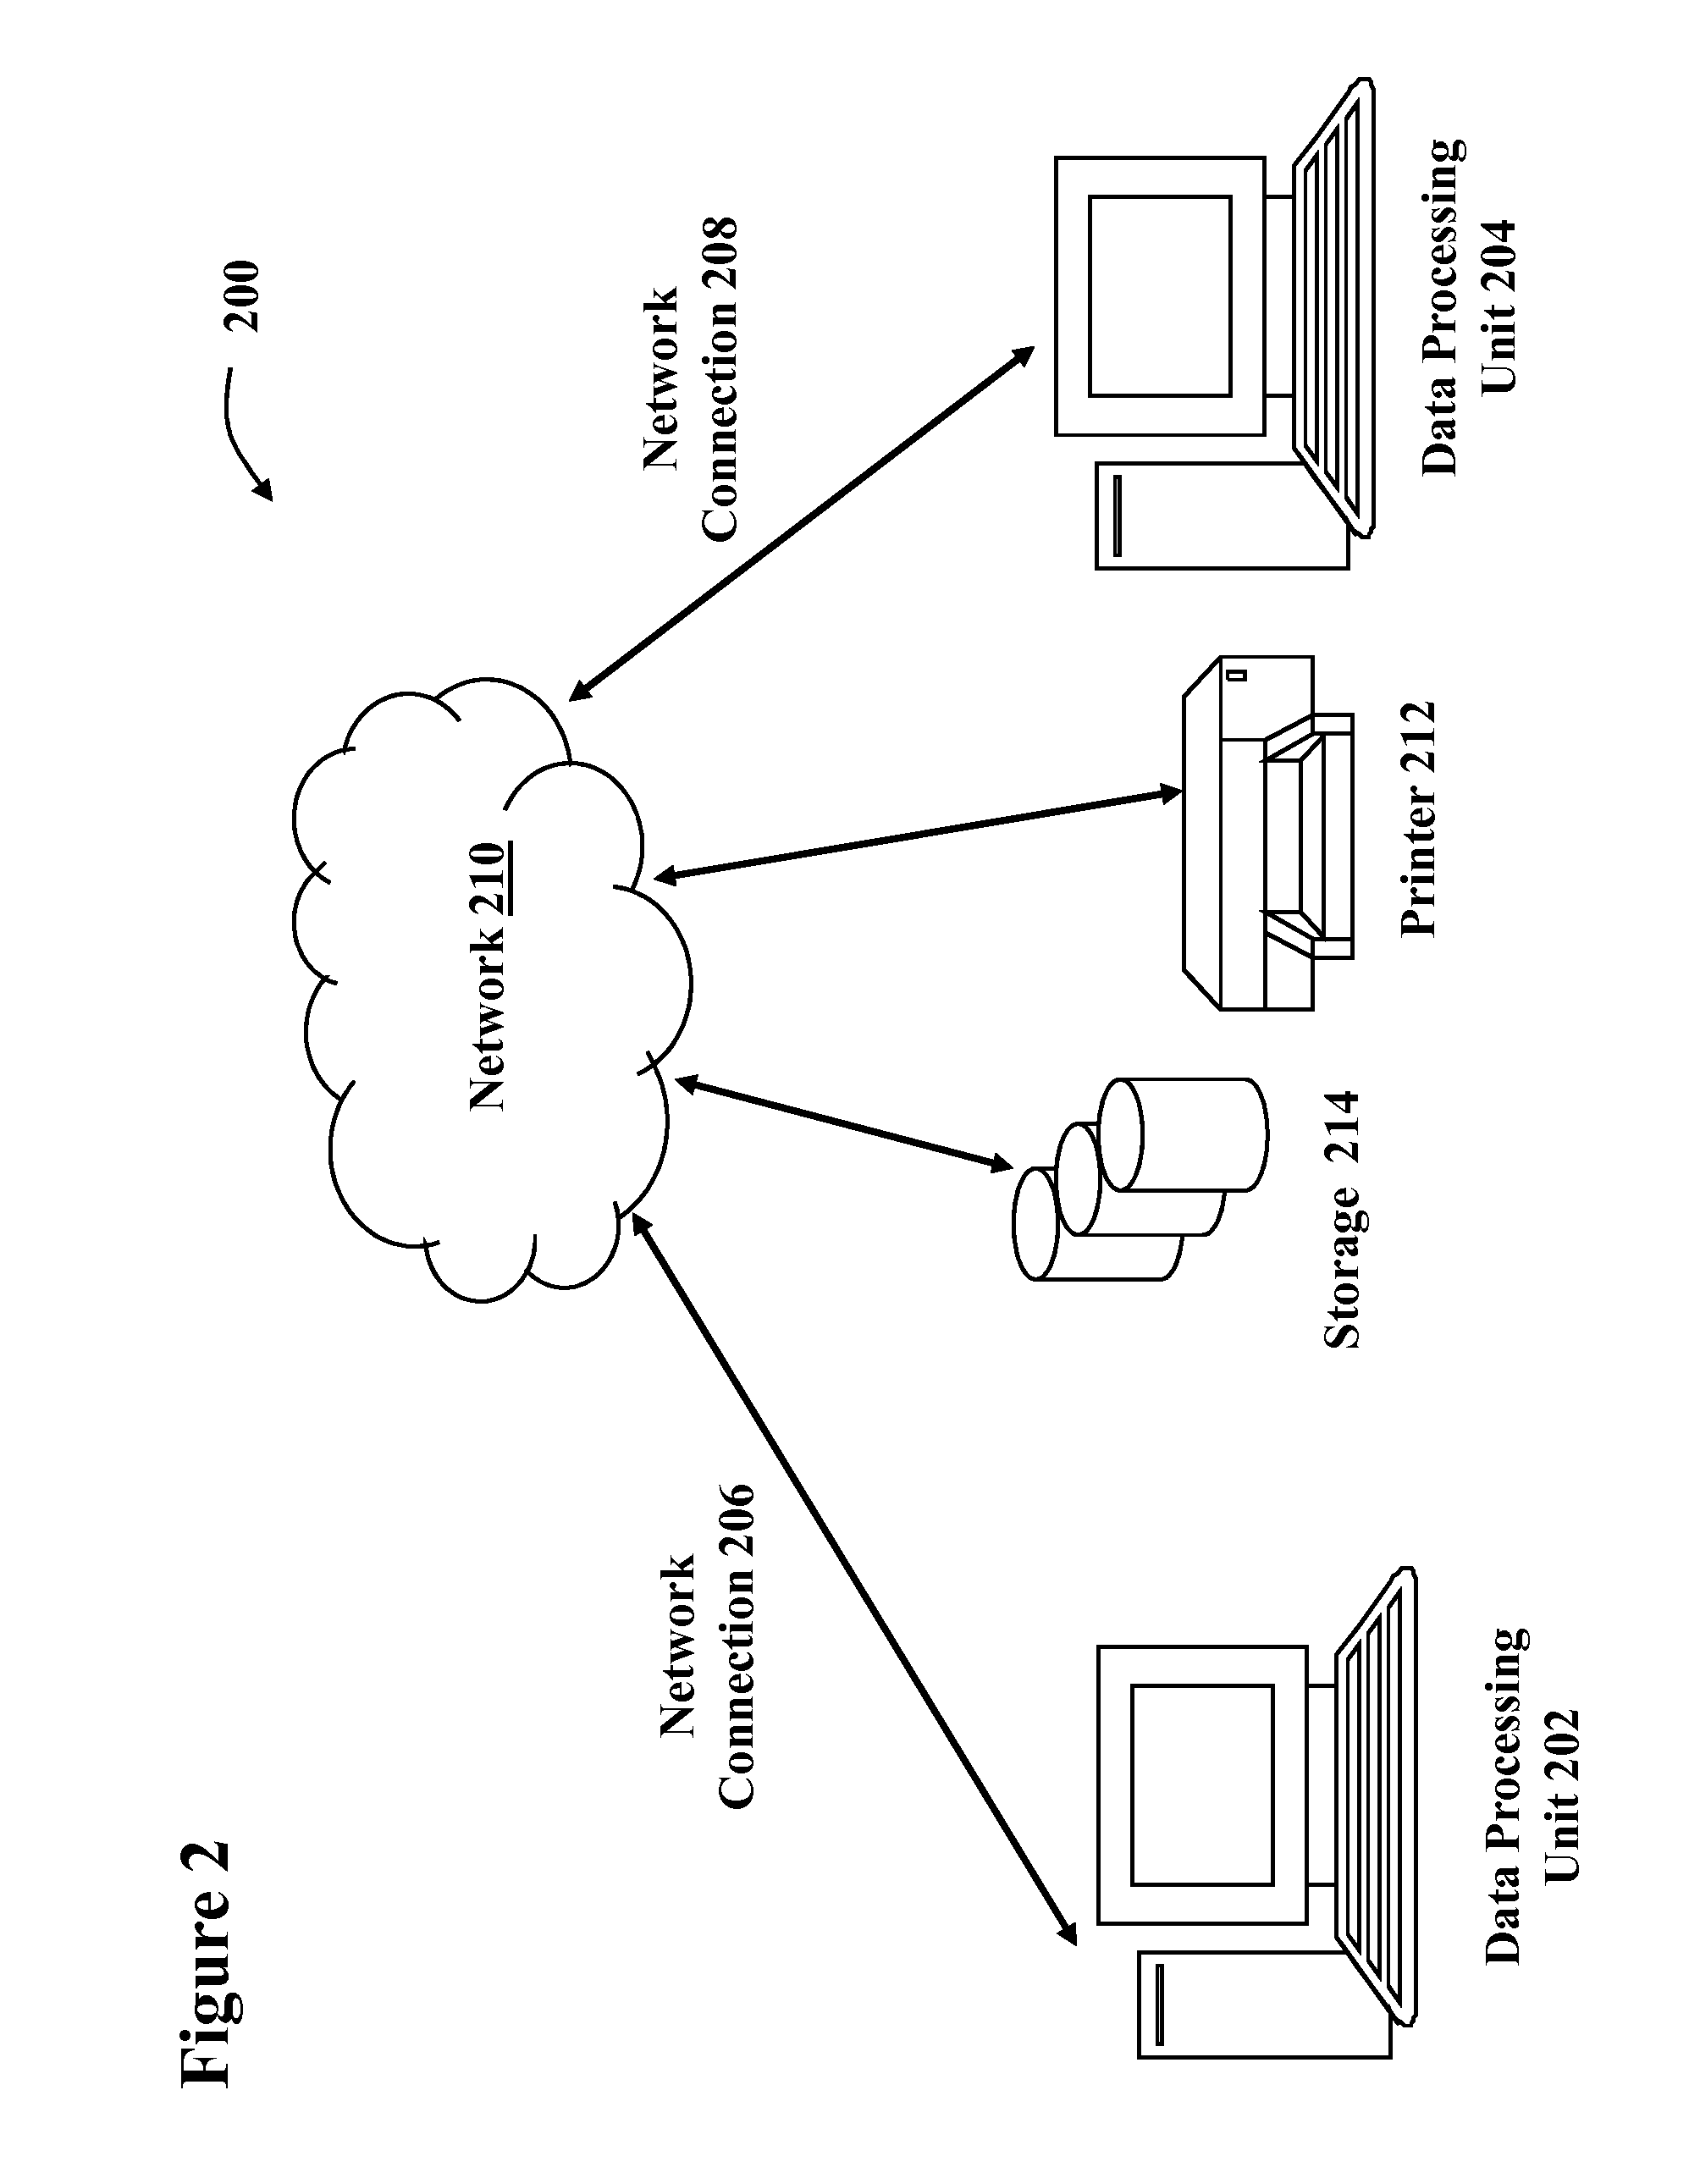 Model-driven data archival system having automated components